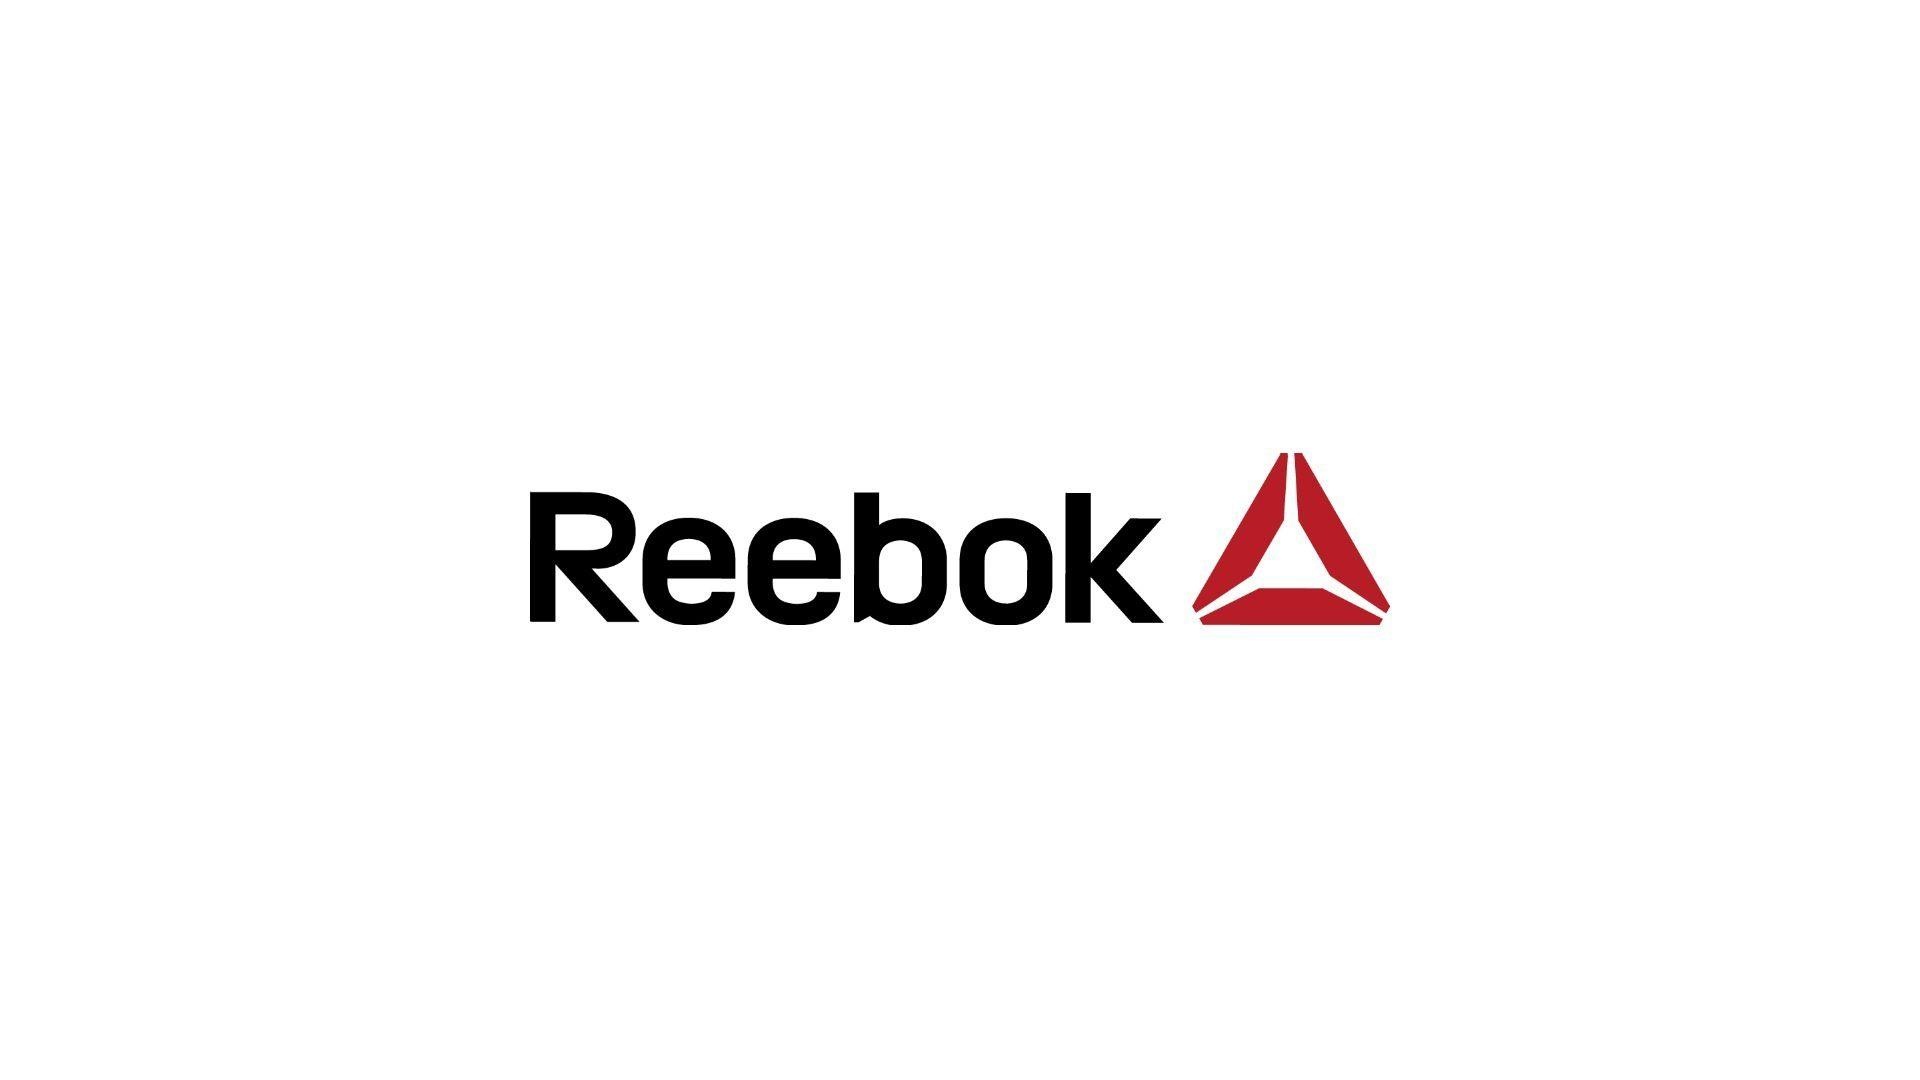 Reebok: An American fitness footwear and clothing manufacturer, Bought by Adidas in 2005. 1920x1080 Full HD Wallpaper.